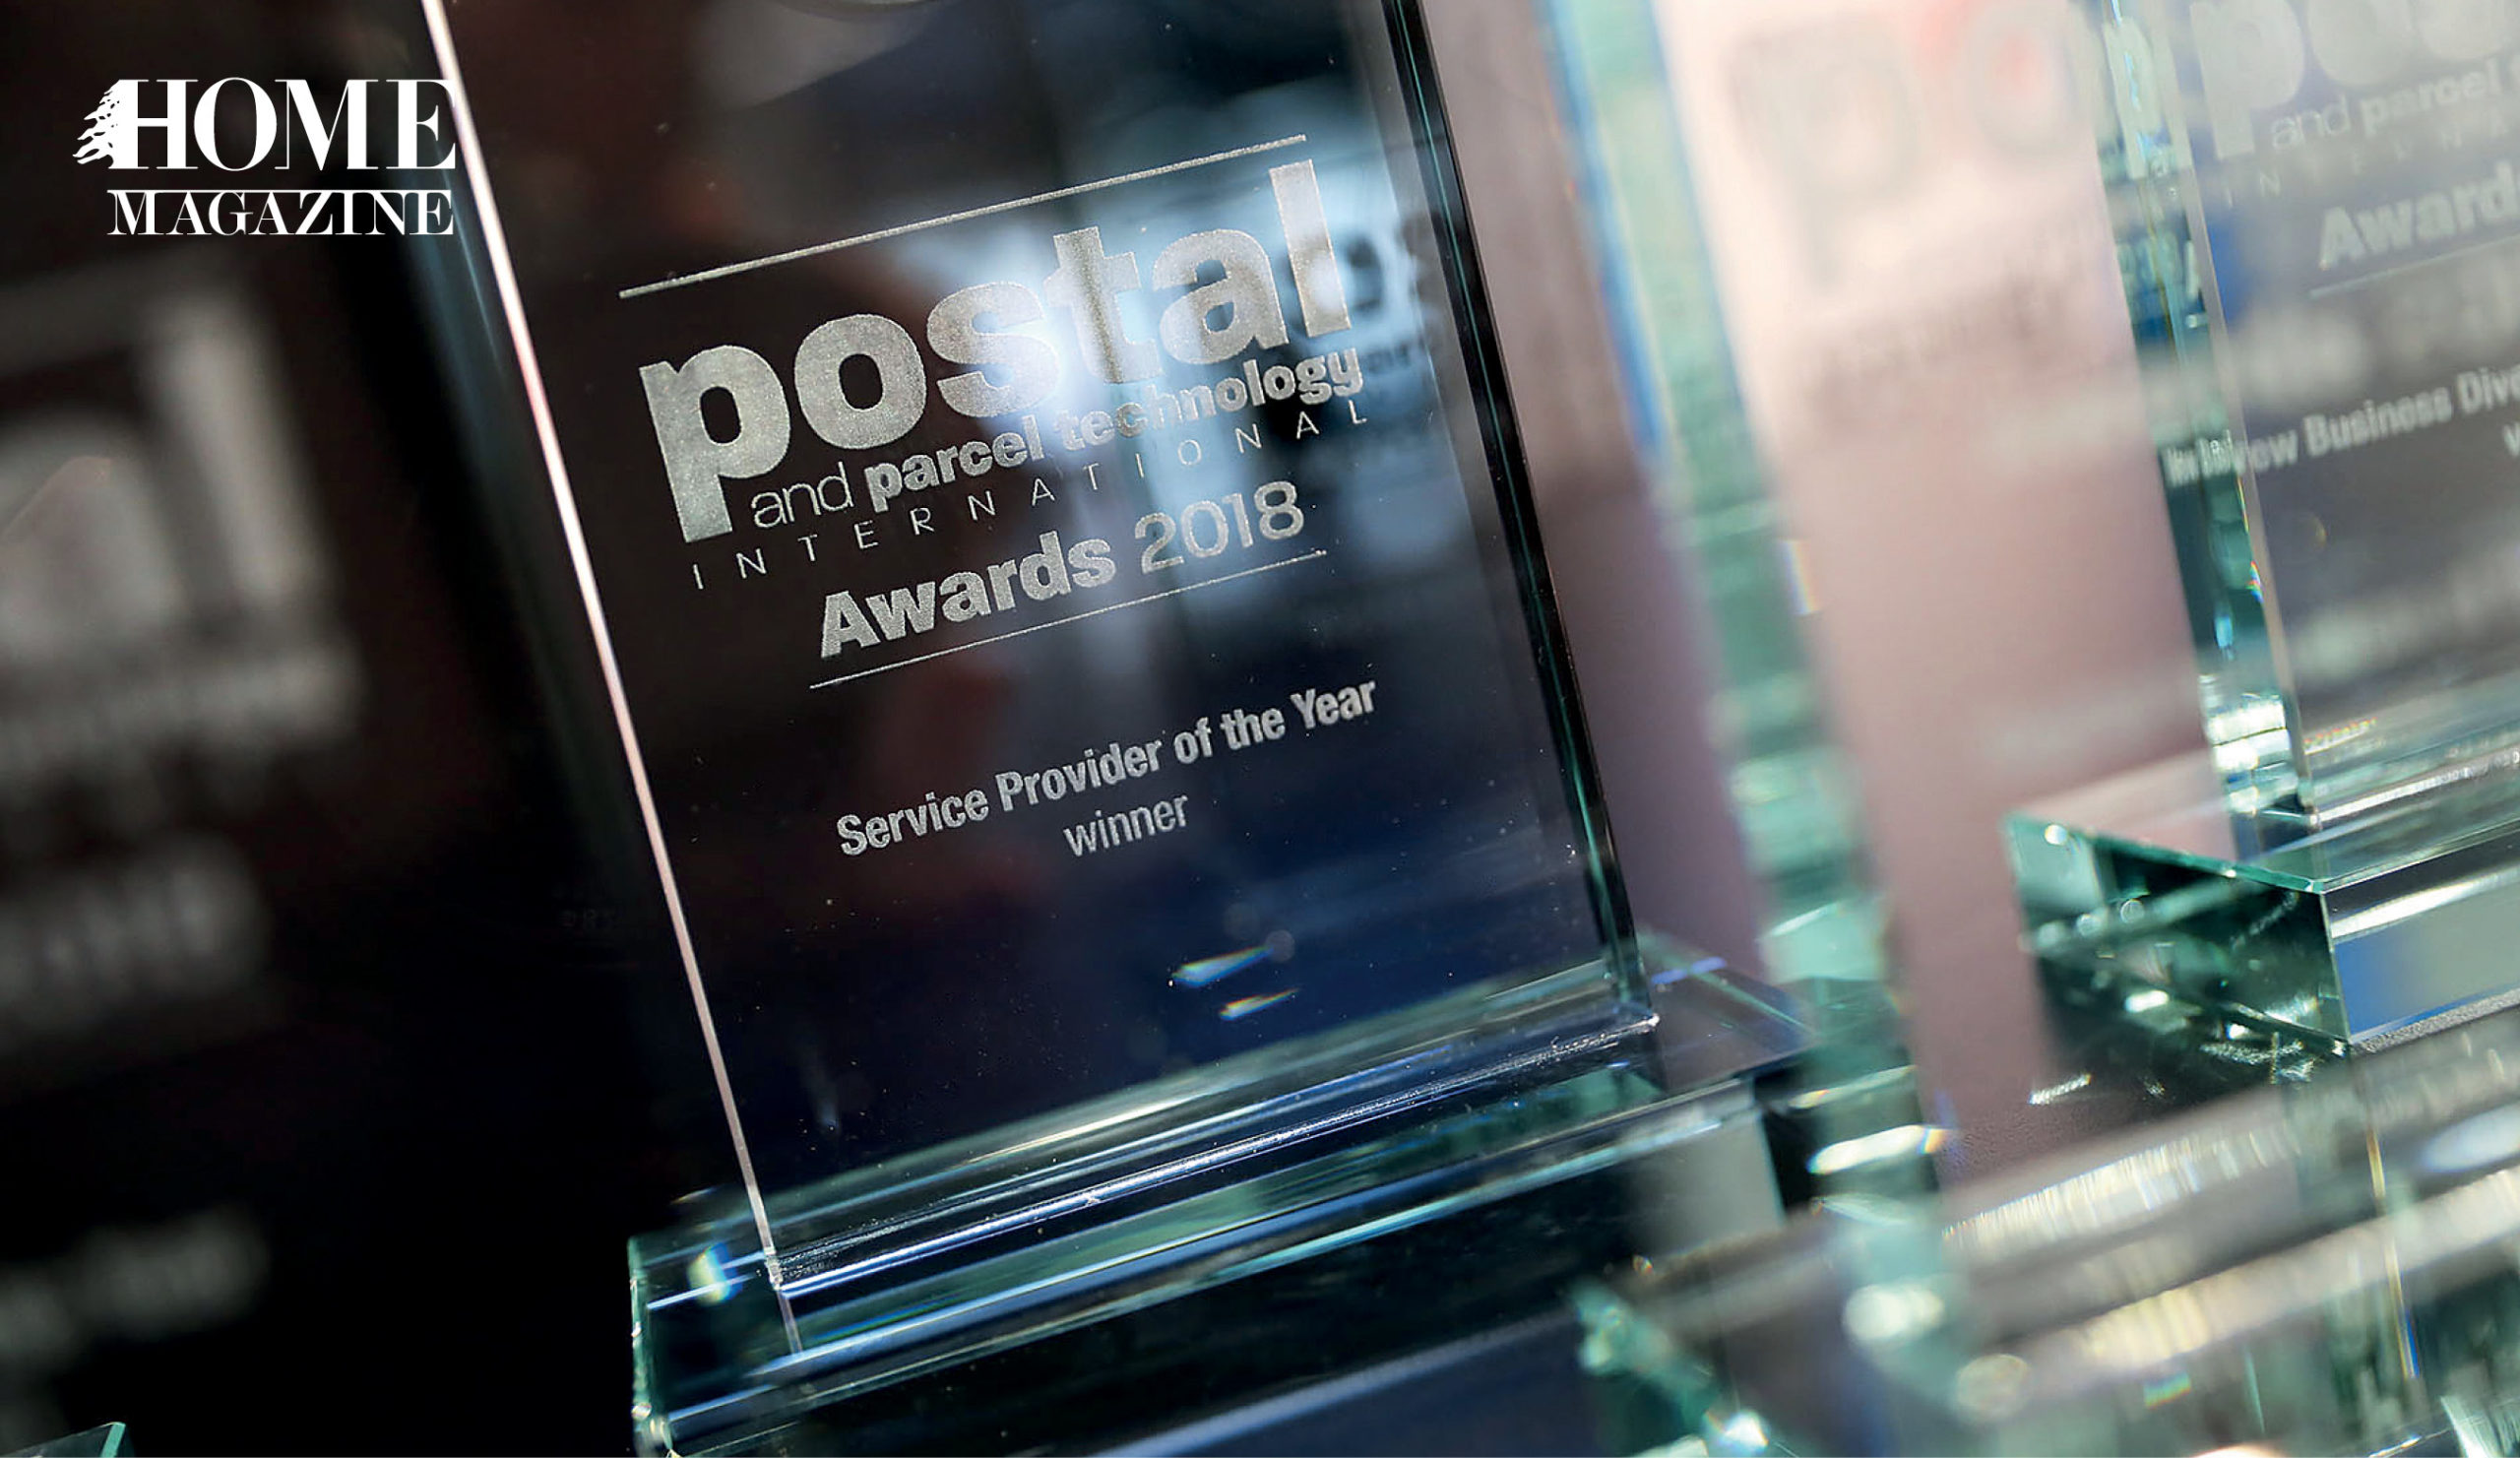 Glass trophy with text postal awards 2018 service provider of the year winner